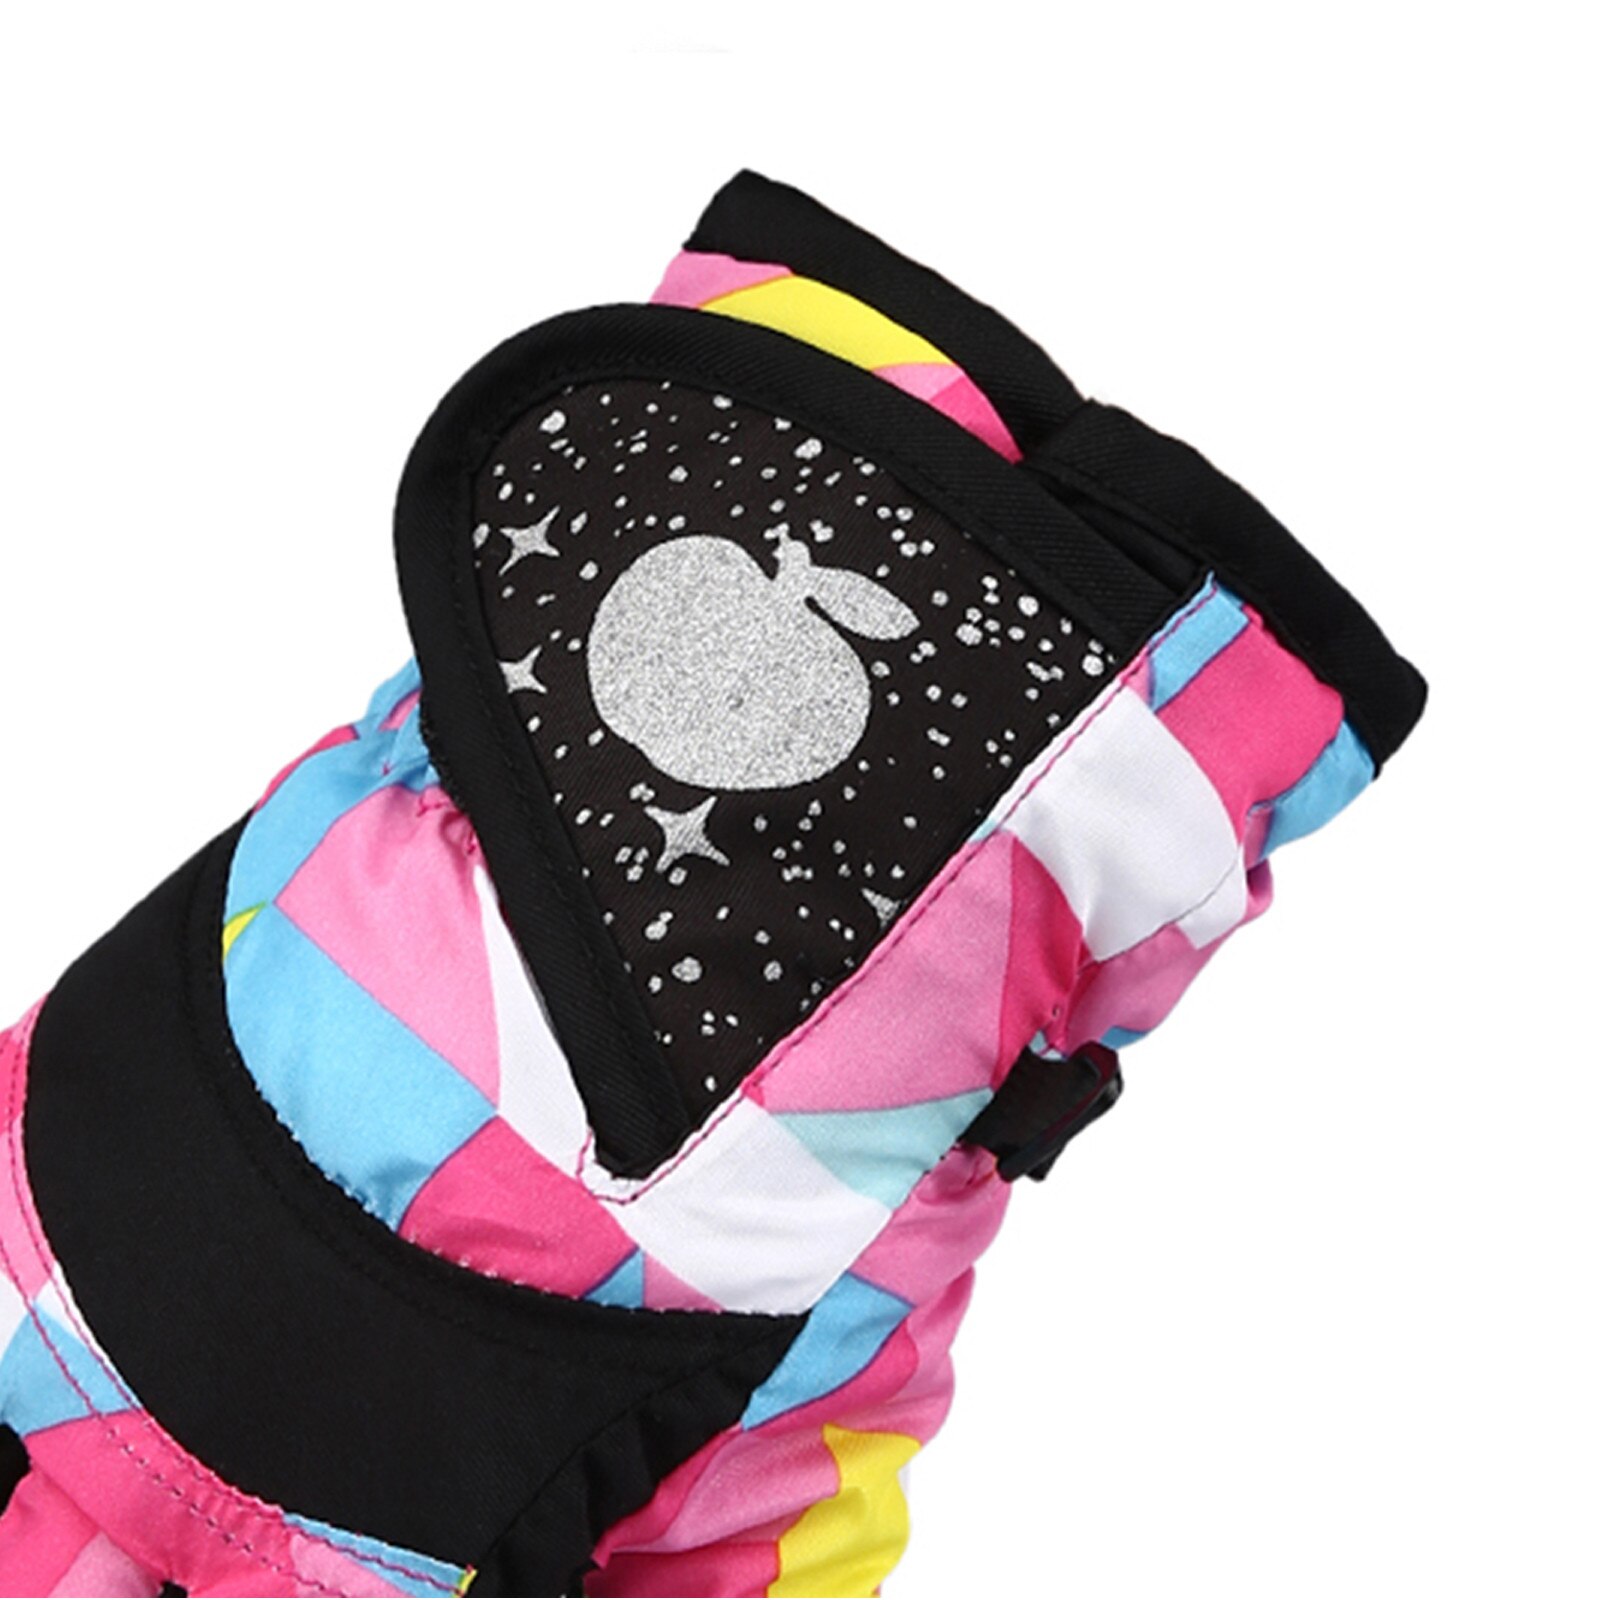 Newest Winter Gloves for Kids Boys Girls Snow Windproof Mittens Outdoor Sports Skiing